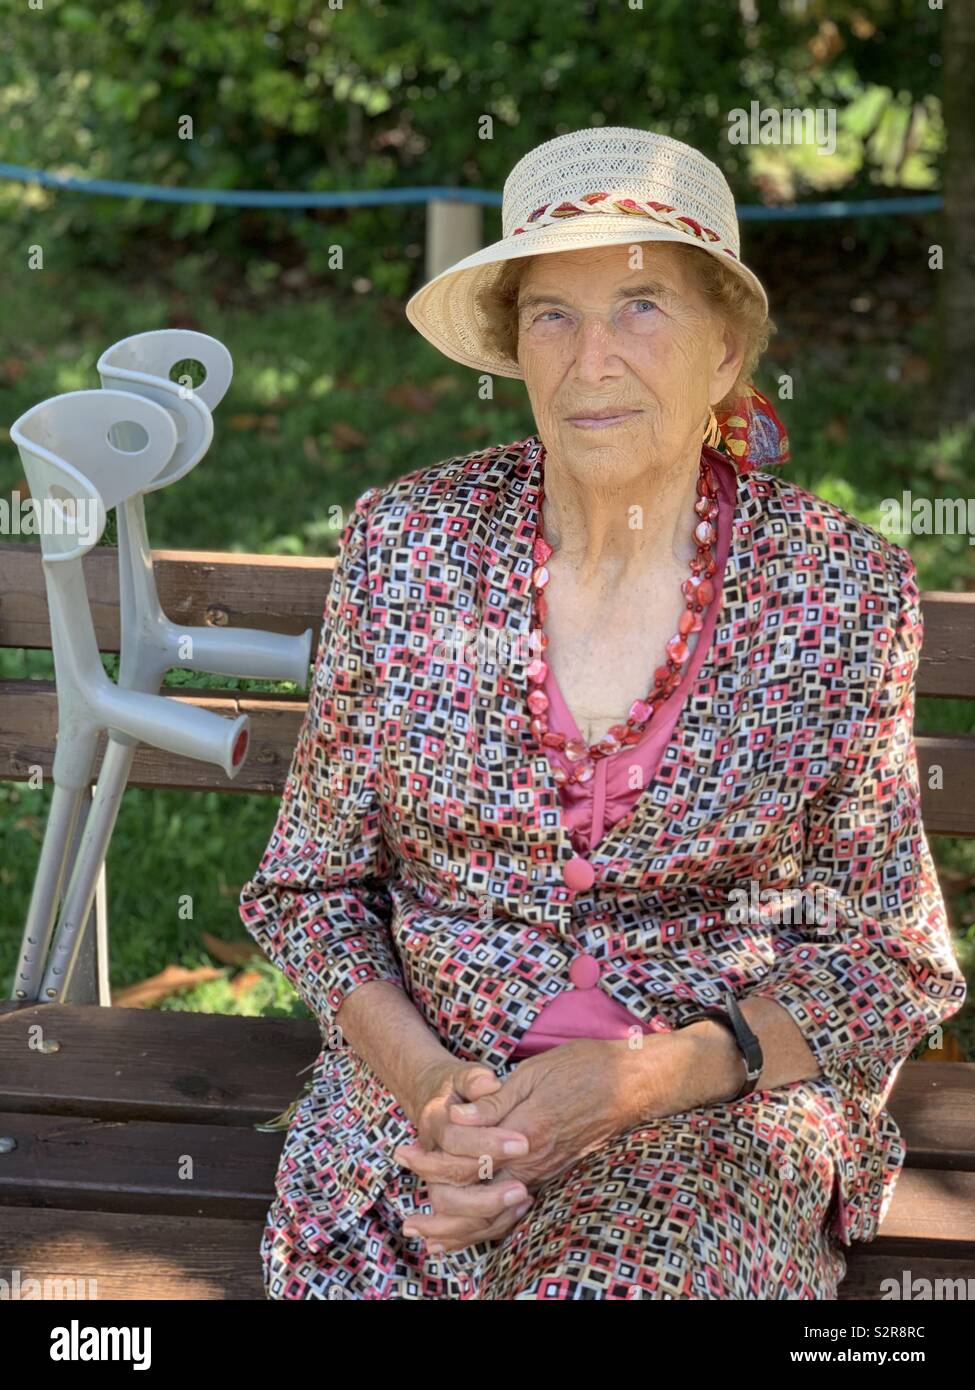 Nonagenarian woman sitting on a public bench Stock Photo